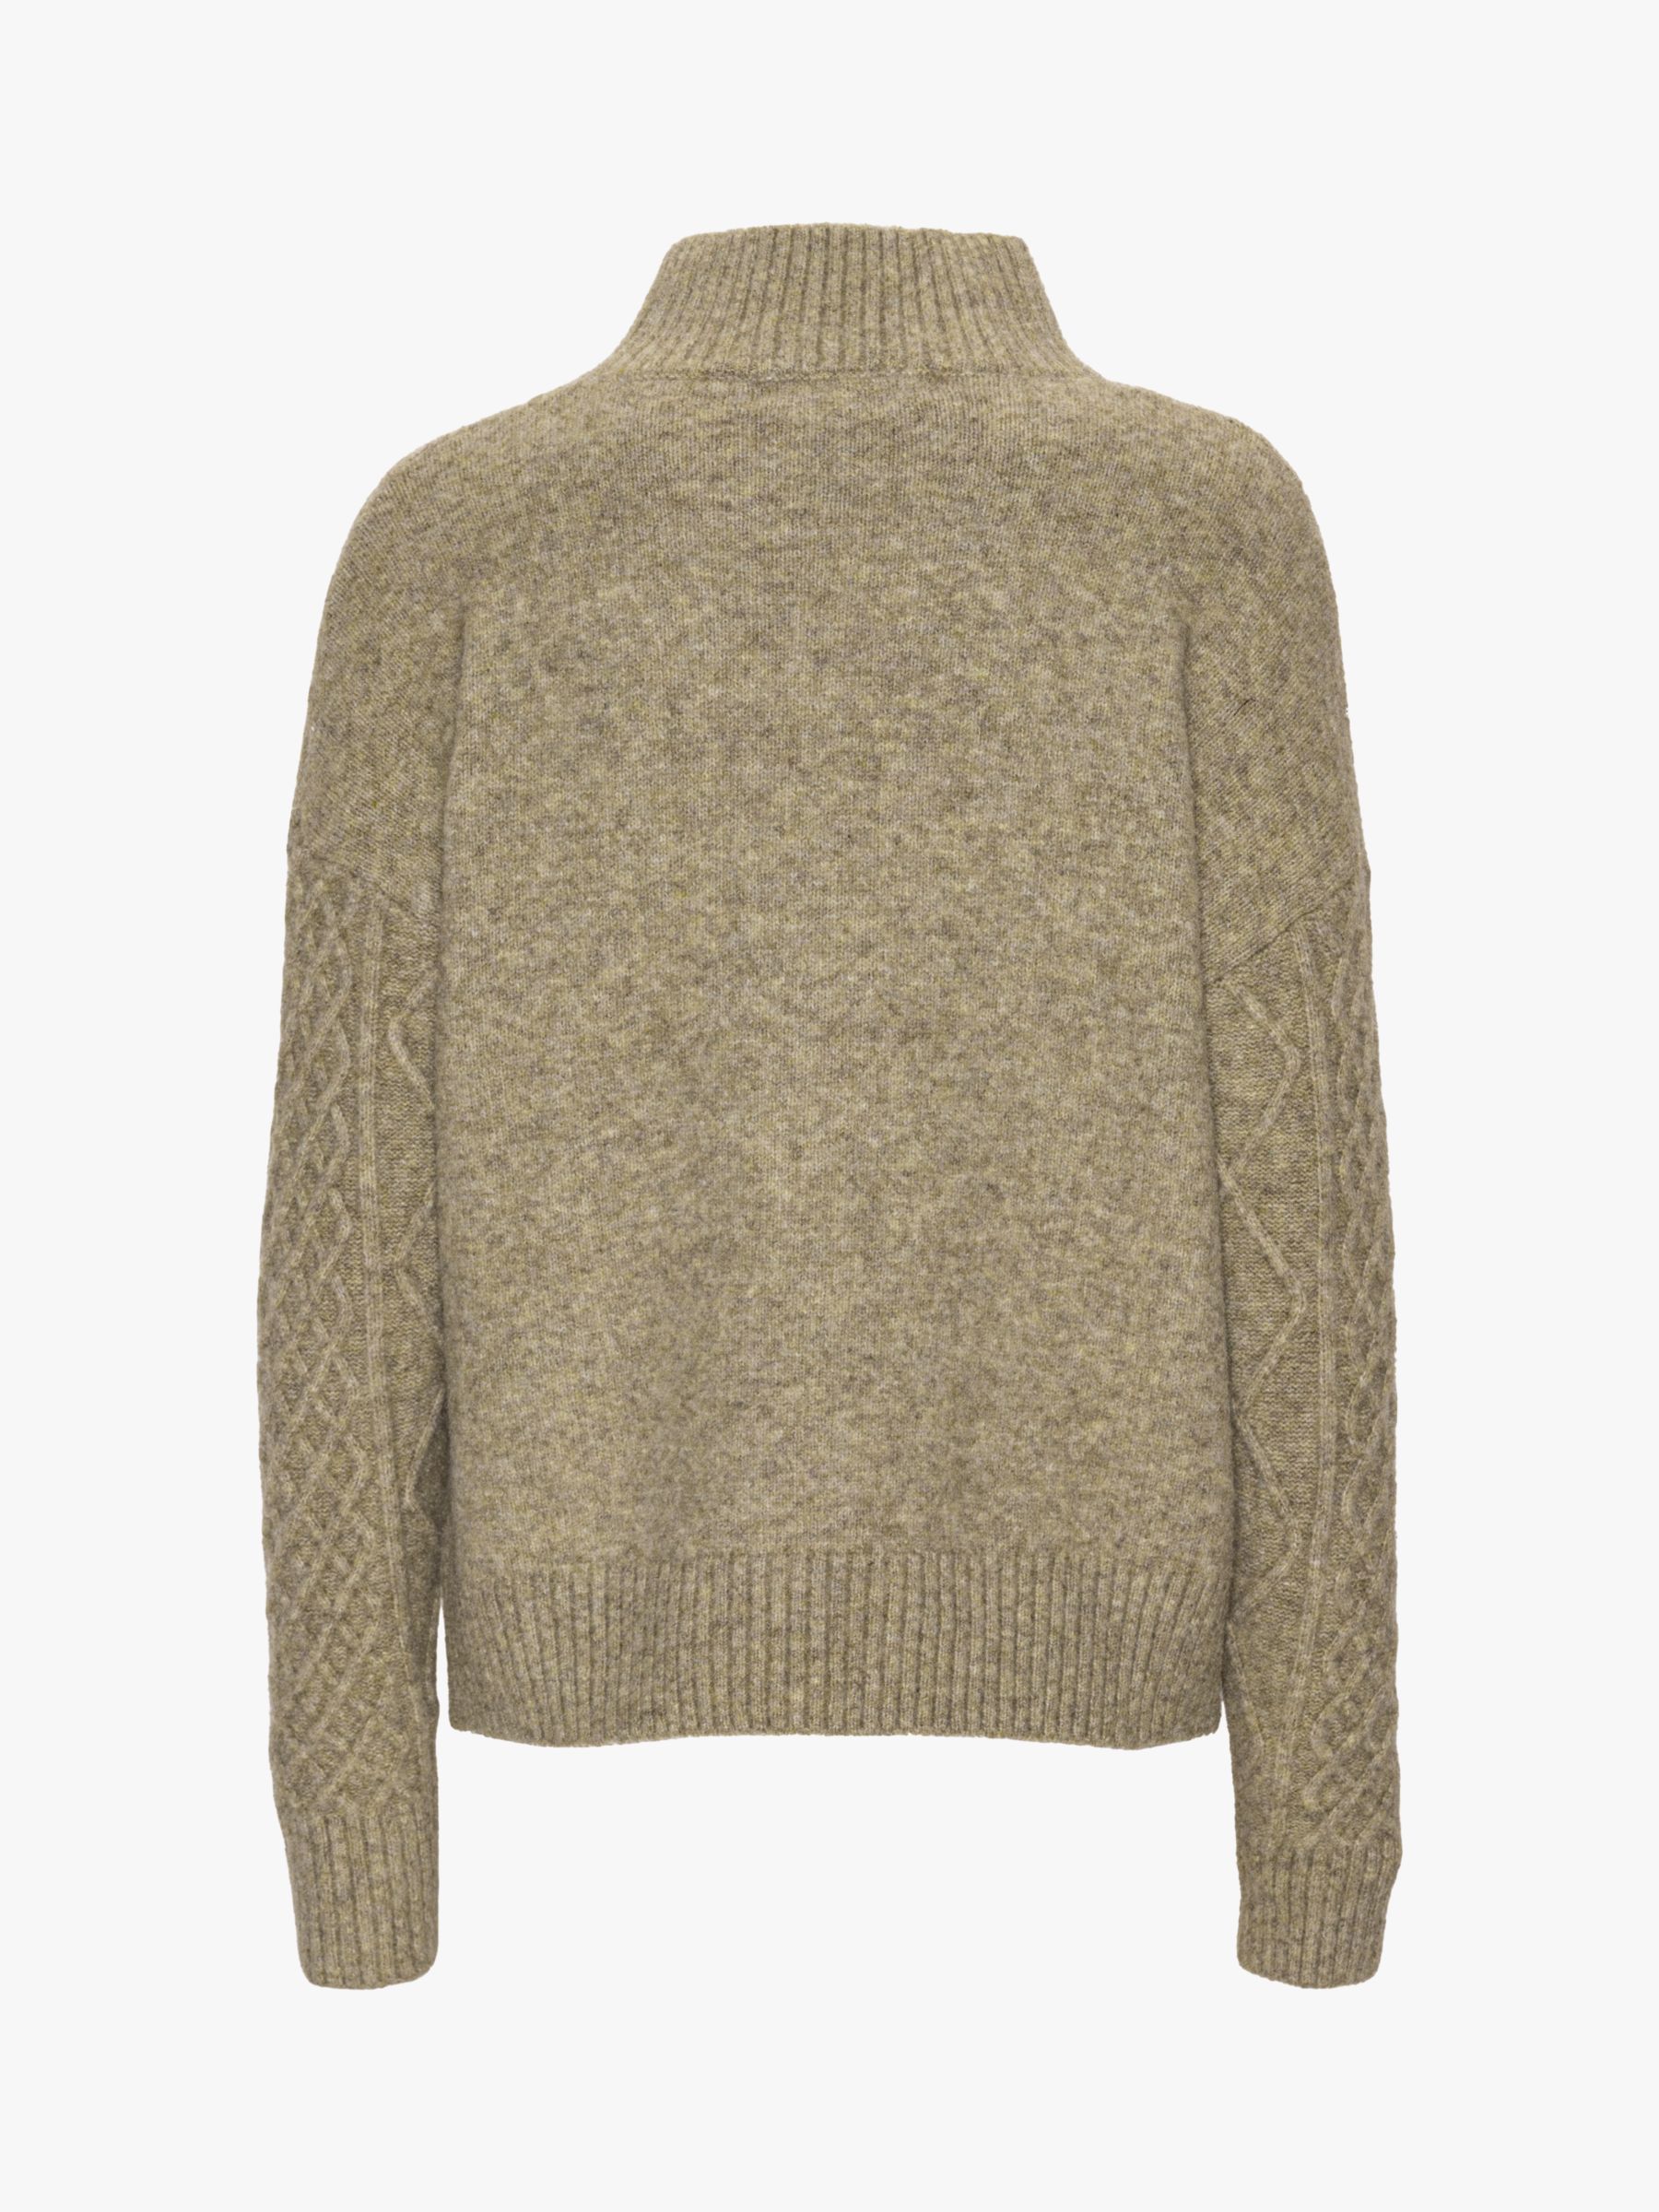 A-VIEW Uvenas Knitted High Neck Jumper, Dusty Green at John Lewis ...